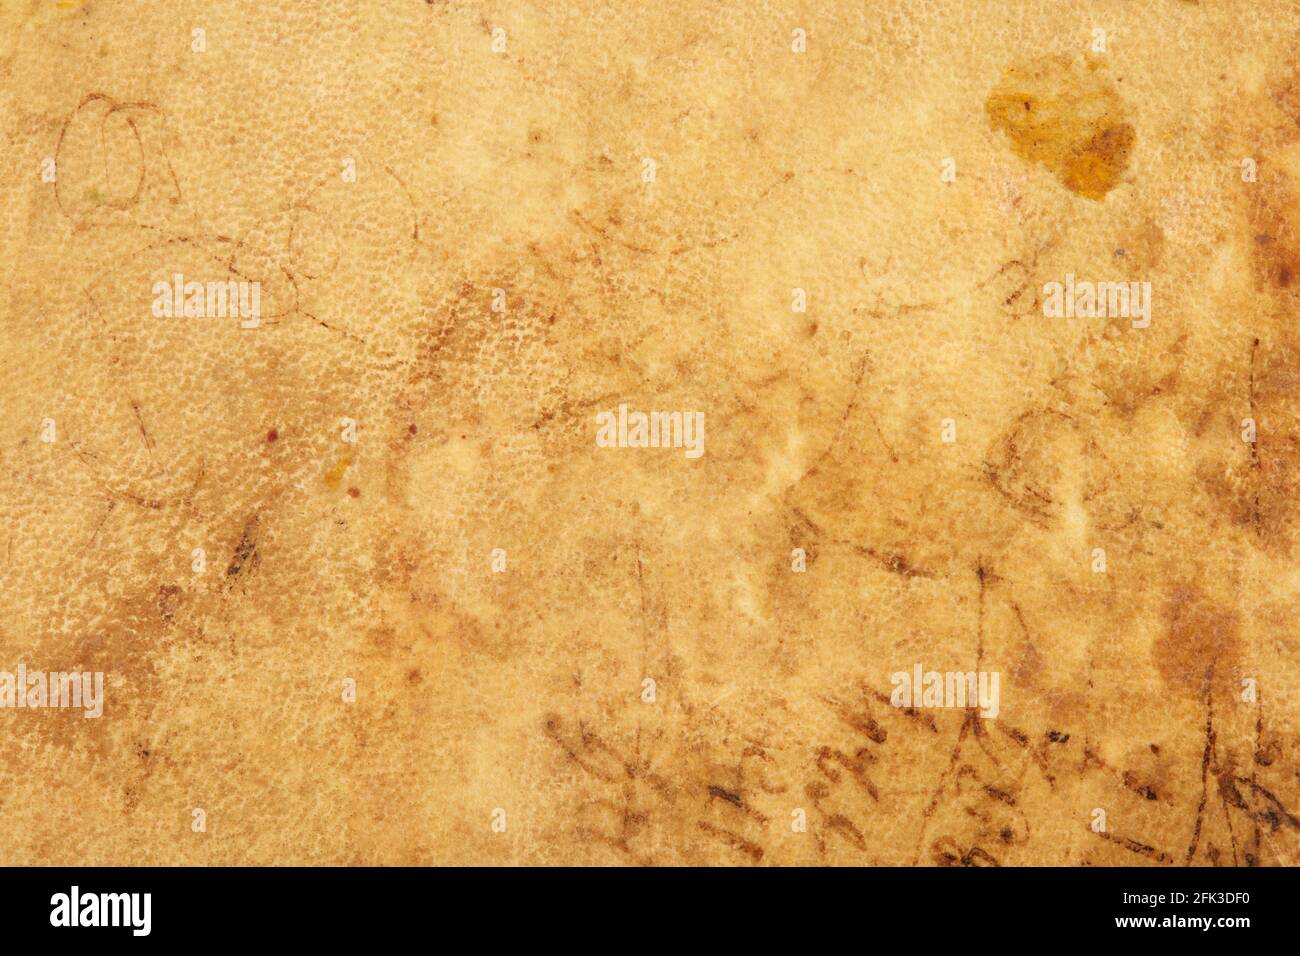 Old parchment leather with ancient handwriting texture background Stock Photo